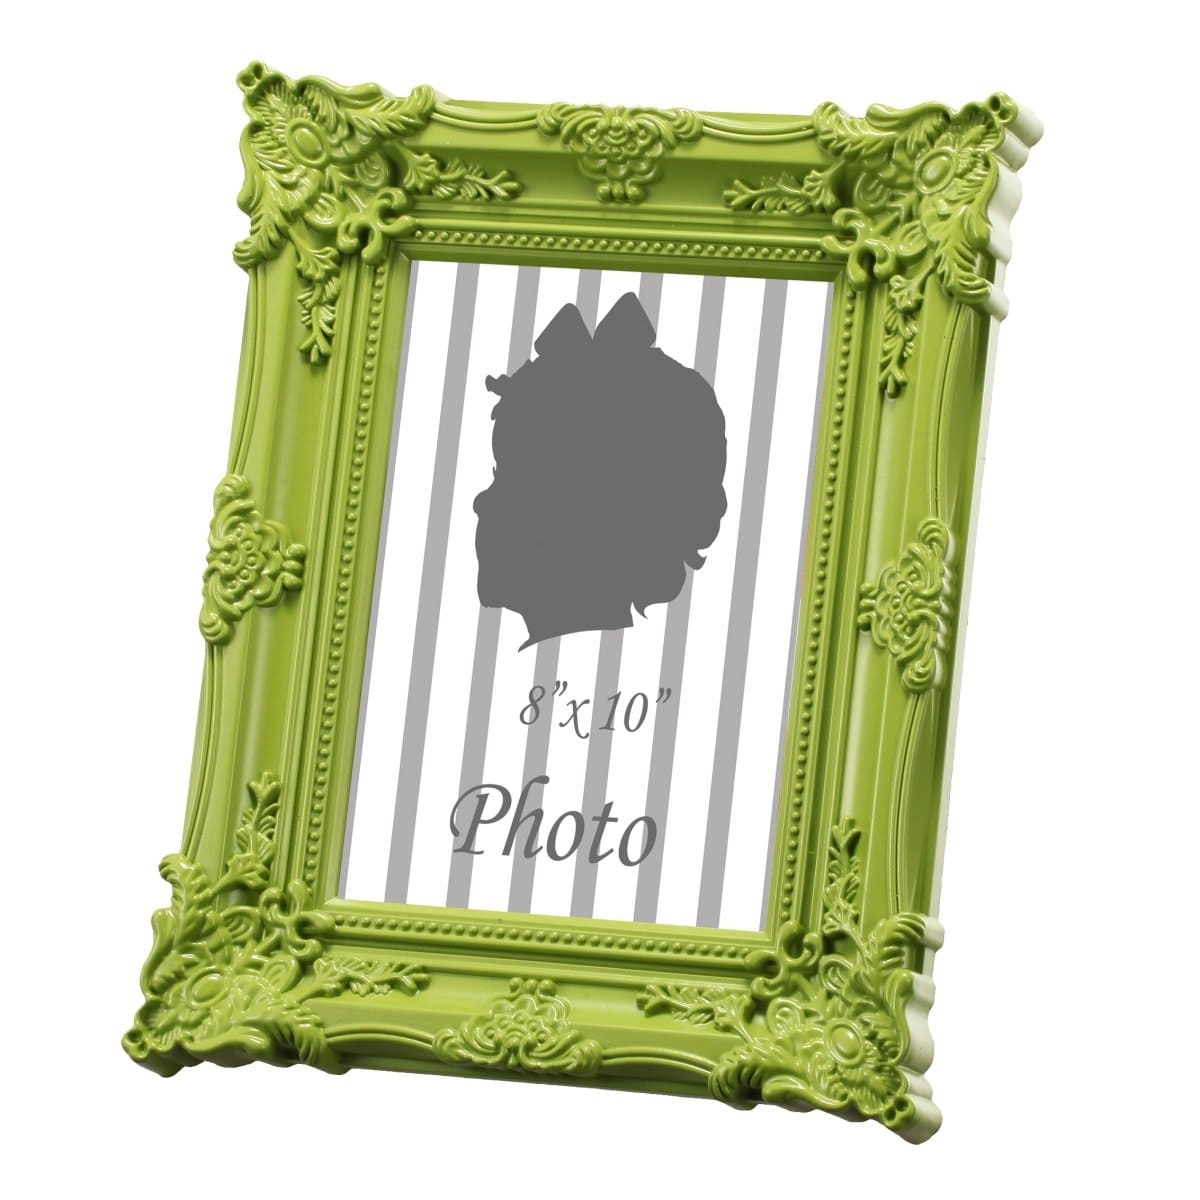 AB-37270-GREE BAROQUE PHOTO FRAME,GREEN 8X10"OPENING picket and rail